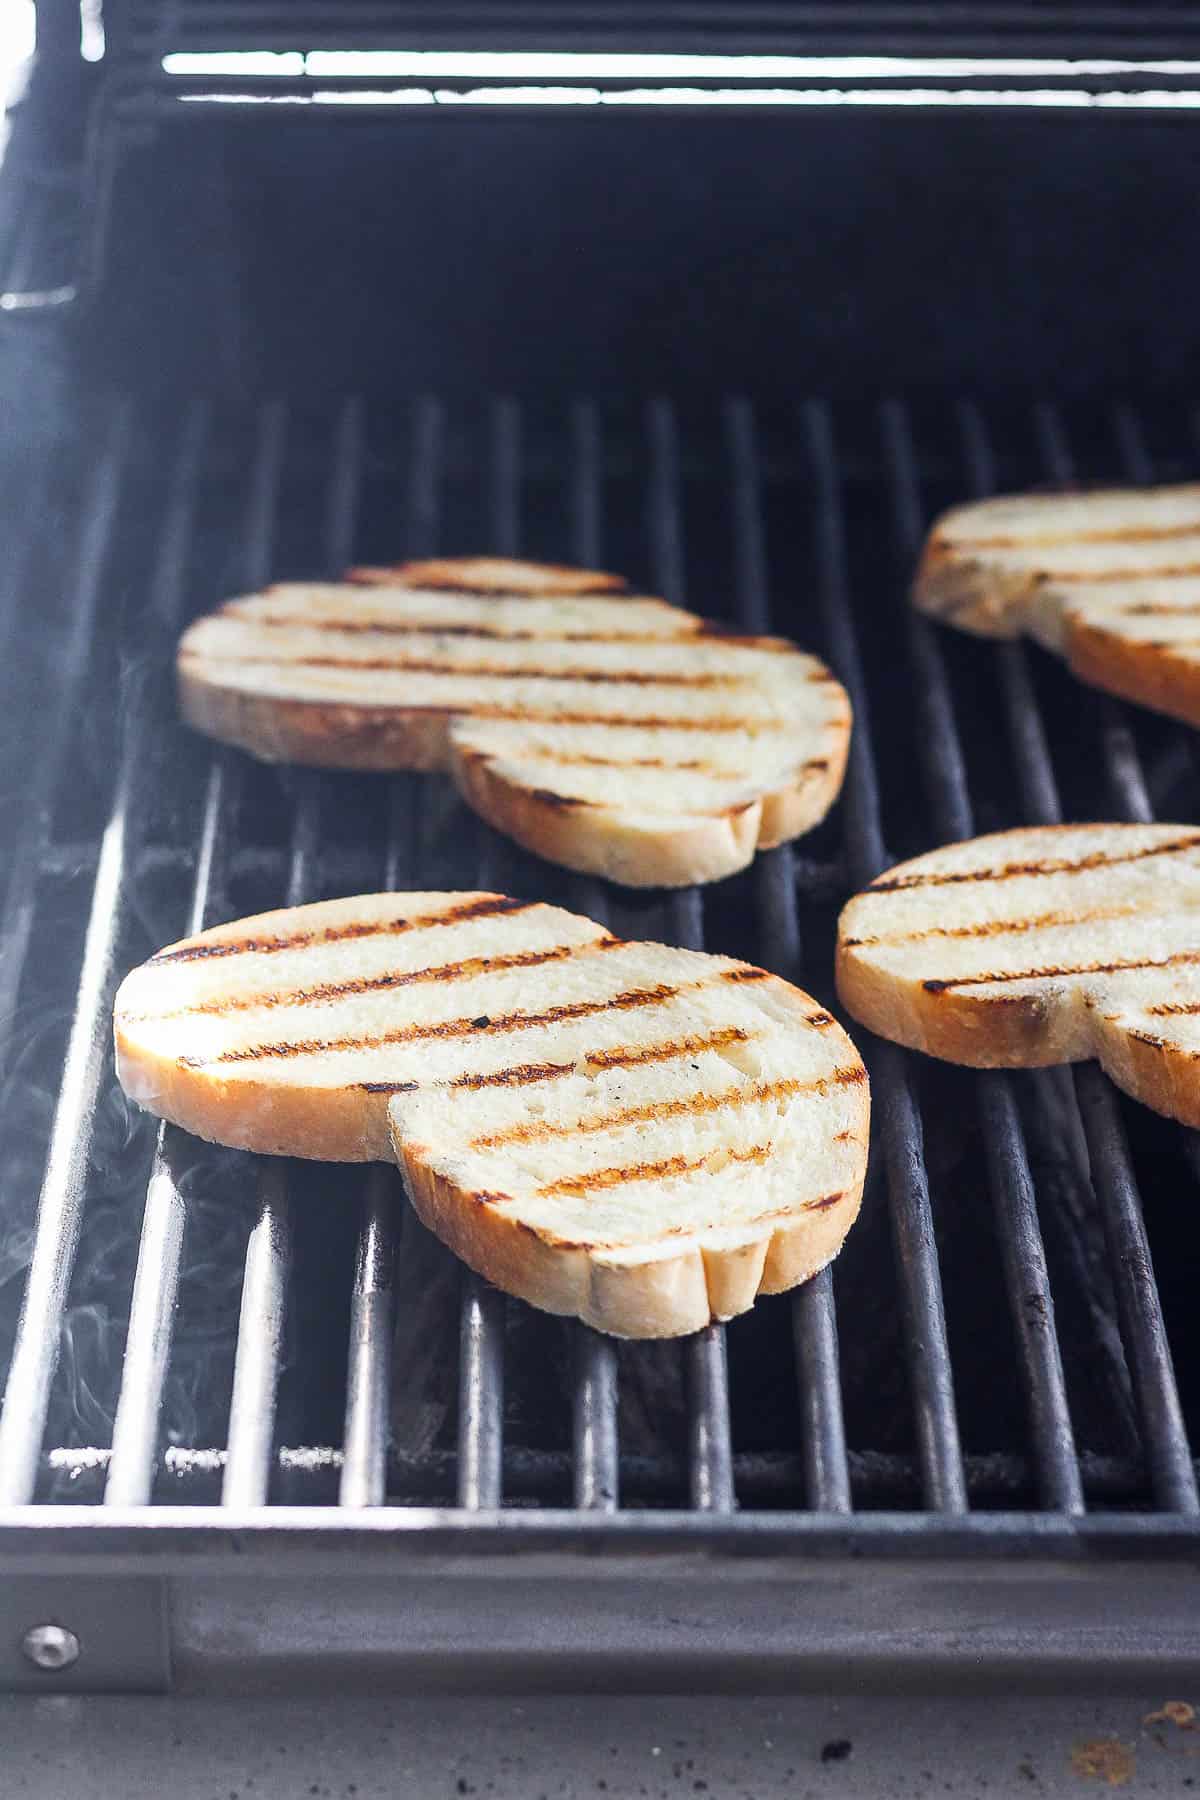 Slices of grilled sourdough bread on the grill.